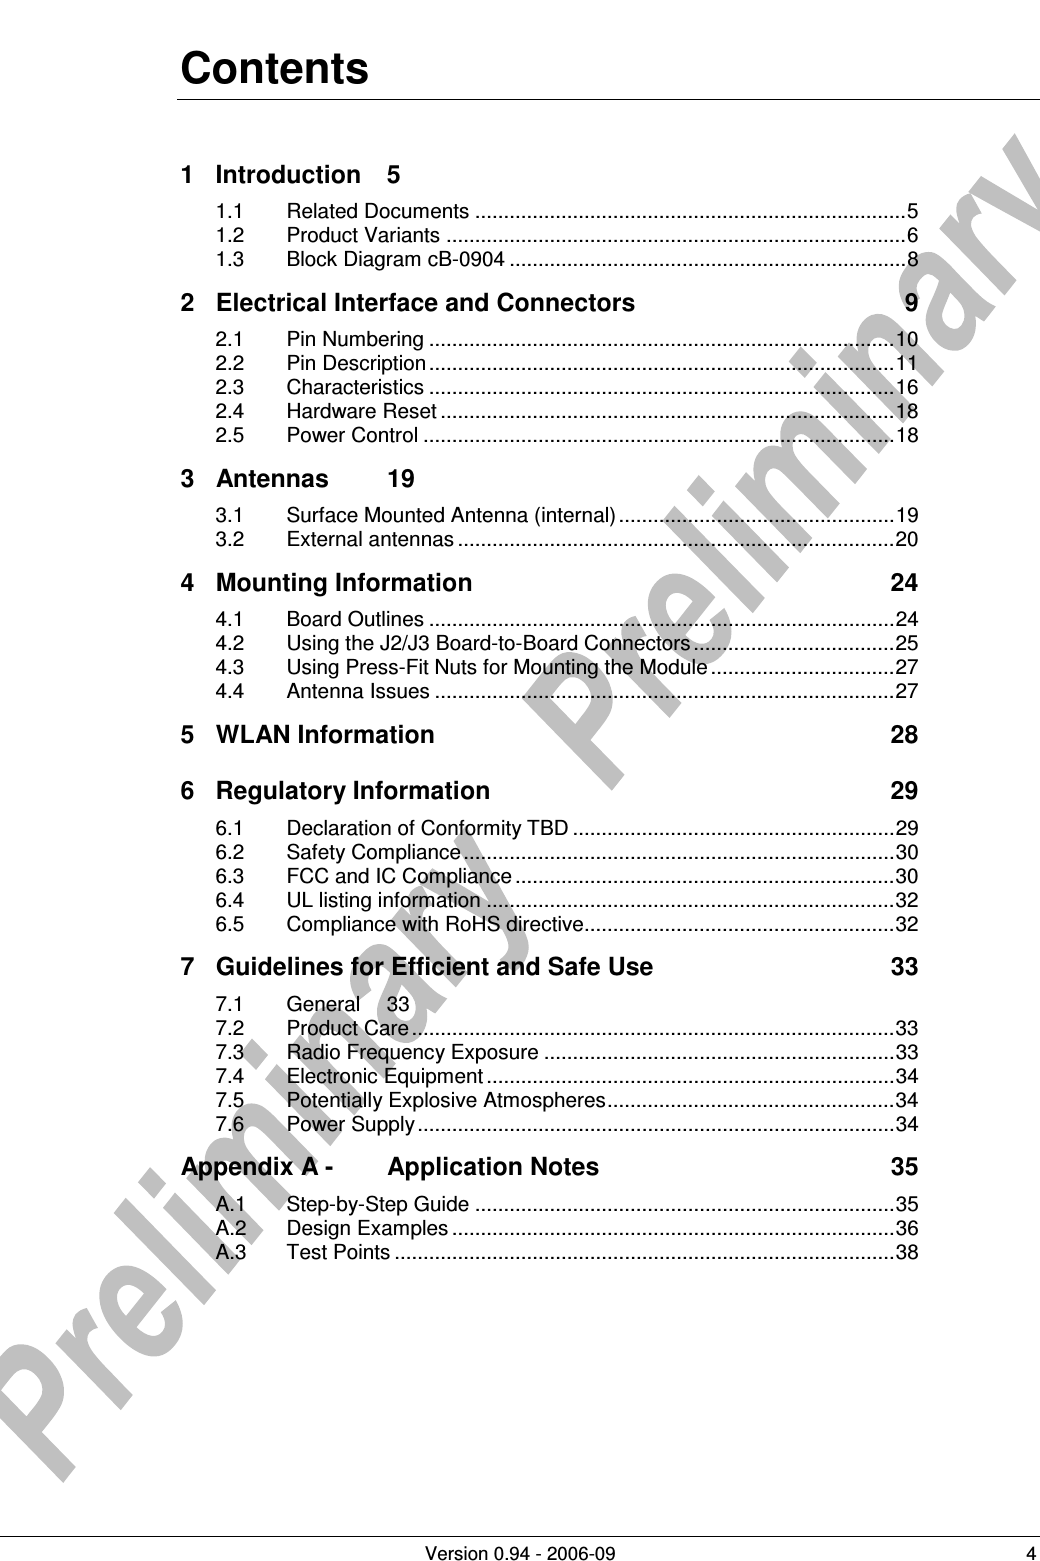          Version 0.94 - 2006-09  4 Contents 1 Introduction  5 1.1 Related Documents ...........................................................................5 1.2 Product Variants ................................................................................6 1.3 Block Diagram cB-0904 .....................................................................8 2 Electrical Interface and Connectors  9 2.1 Pin Numbering .................................................................................10 2.2 Pin Description .................................................................................11 2.3 Characteristics .................................................................................16 2.4 Hardware Reset ...............................................................................18 2.5 Power Control ..................................................................................18 3 Antennas  19 3.1 Surface Mounted Antenna (internal)................................................19 3.2 External antennas ............................................................................20 4 Mounting Information  24 4.1 Board Outlines .................................................................................24 4.2 Using the J2/J3 Board-to-Board Connectors ...................................25 4.3 Using Press-Fit Nuts for Mounting the Module ................................27 4.4 Antenna Issues ................................................................................27 5 WLAN Information  28 6 Regulatory Information  29 6.1 Declaration of Conformity TBD ........................................................29 6.2 Safety Compliance...........................................................................30 6.3 FCC and IC Compliance ..................................................................30 6.4 UL listing information .......................................................................32 6.5 Compliance with RoHS directive......................................................32 7 Guidelines for Efficient and Safe Use  33 7.1 General  33 7.2 Product Care ....................................................................................33 7.3 Radio Frequency Exposure .............................................................33 7.4 Electronic Equipment .......................................................................34 7.5 Potentially Explosive Atmospheres..................................................34 7.6 Power Supply...................................................................................34 Appendix A - Application Notes  35 A.1 Step-by-Step Guide .........................................................................35 A.2 Design Examples .............................................................................36 A.3 Test Points .......................................................................................38  